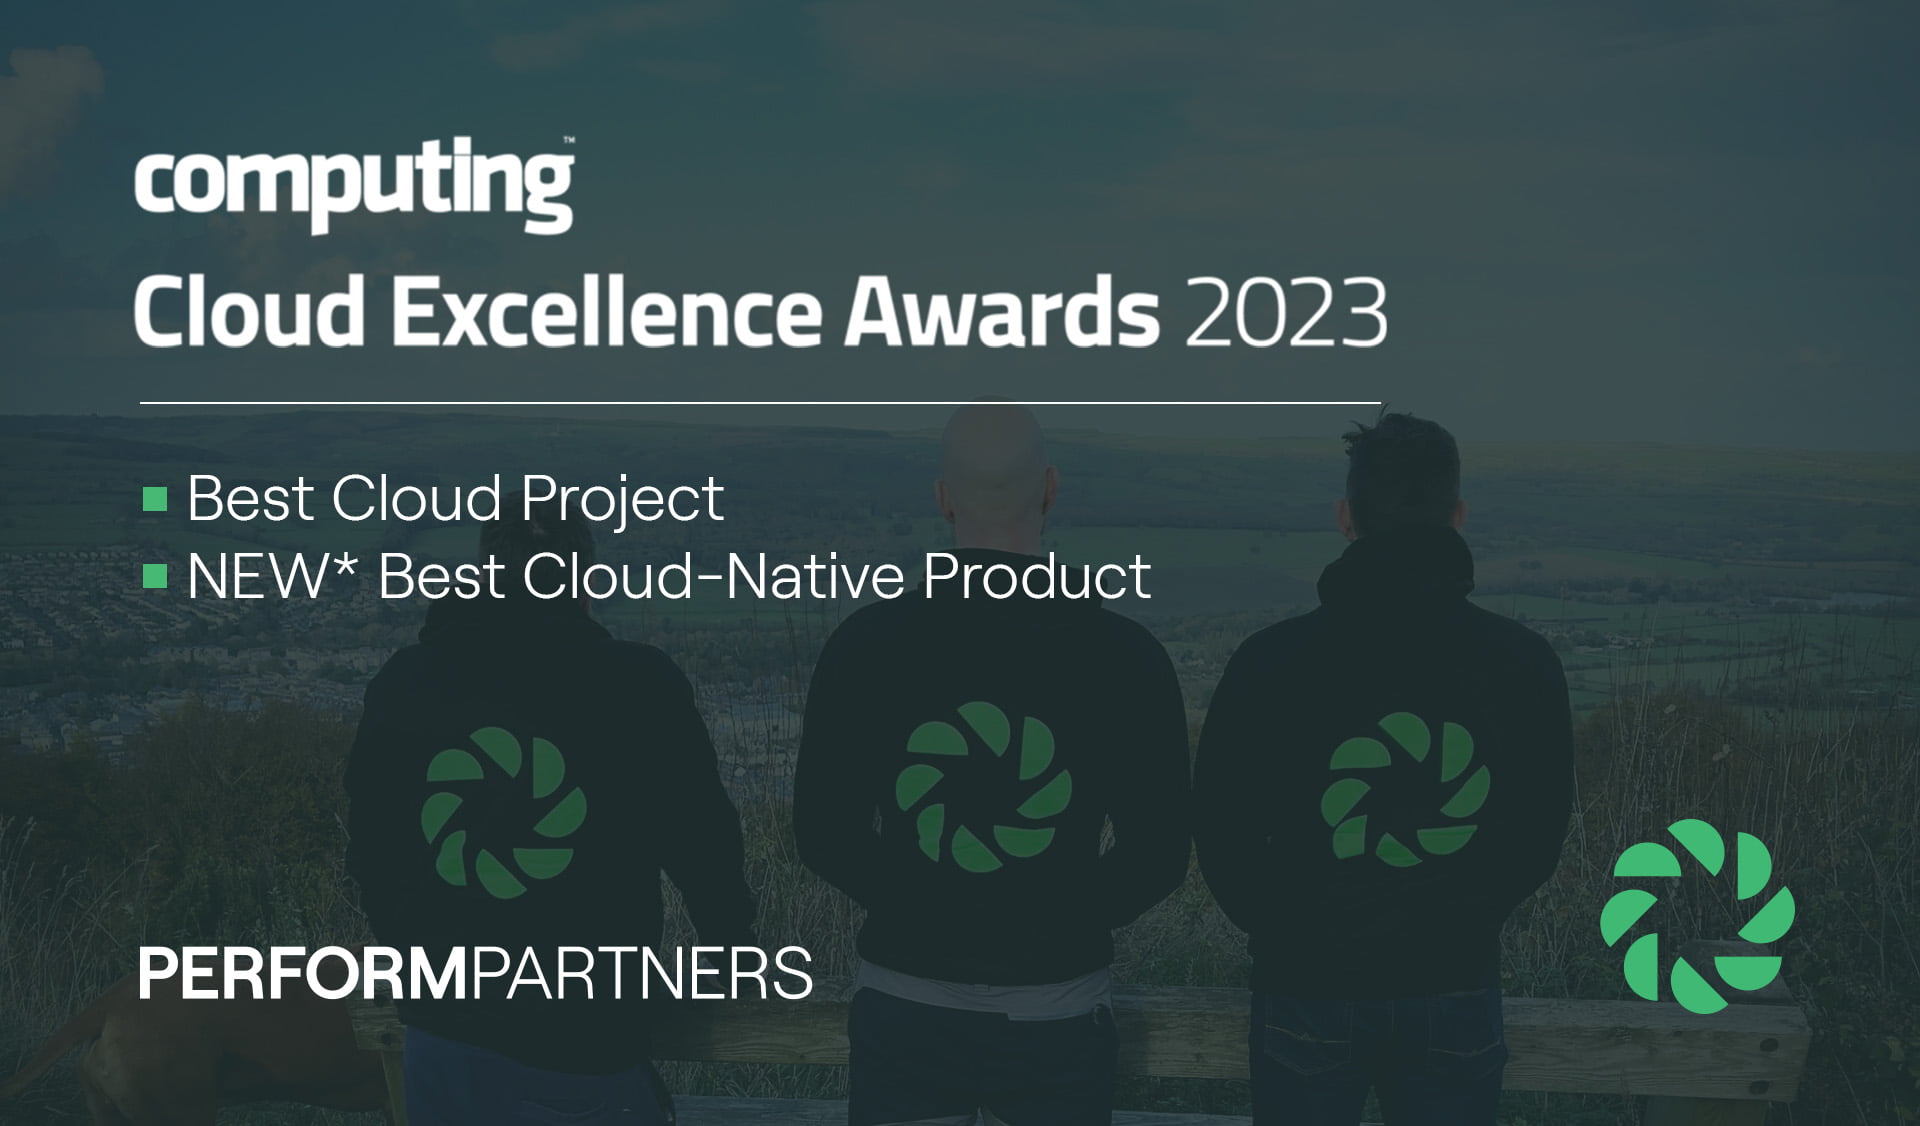 Perform Partners announce Finalist for Cloud Excellence Computing Award